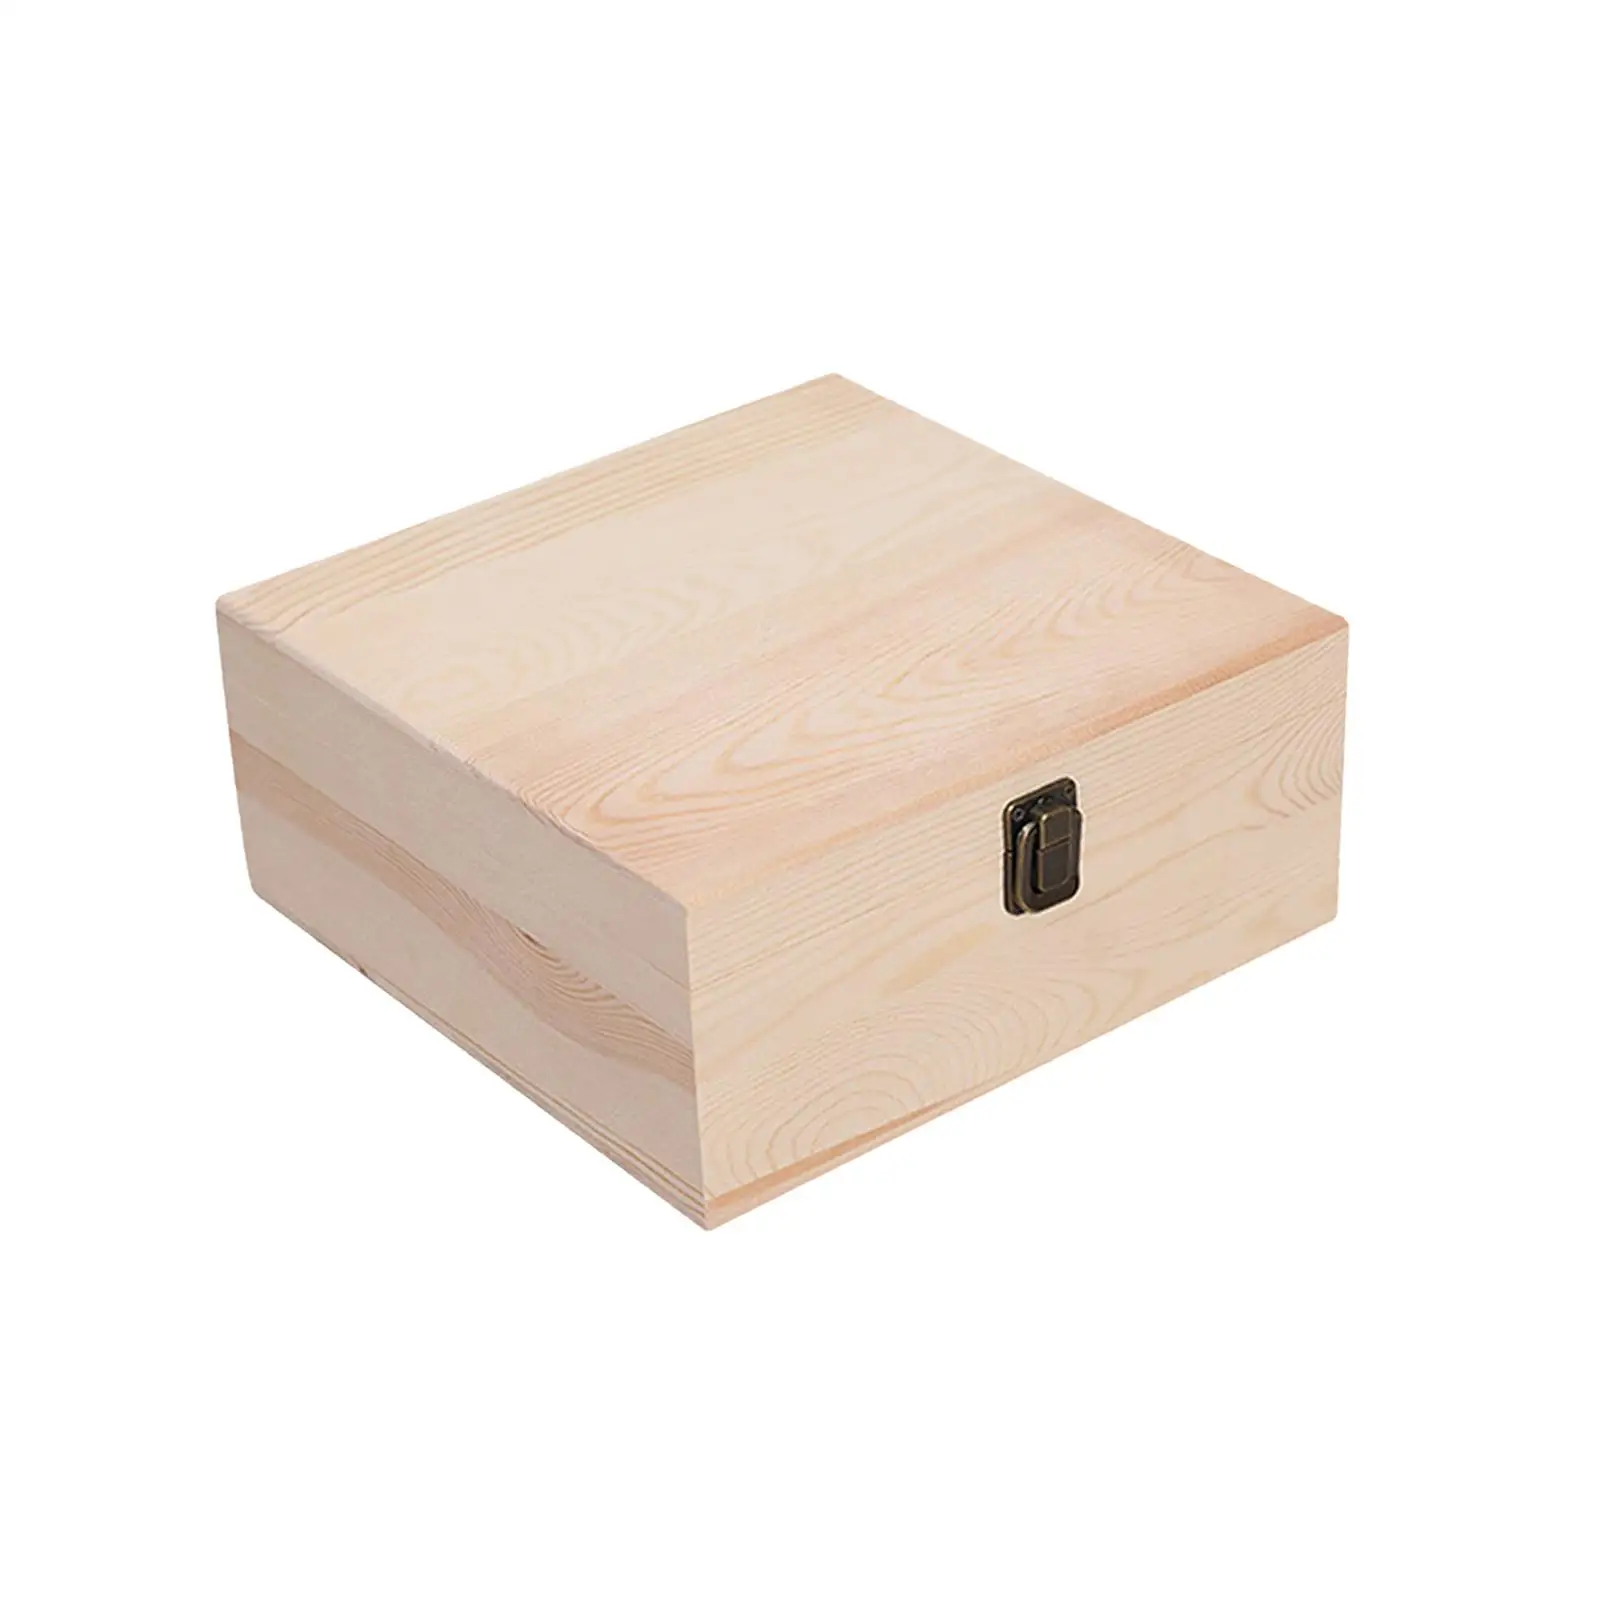 Wooden Keepsake Box with Lid Gift Wooden Storage Box for Home Decorative Boxes